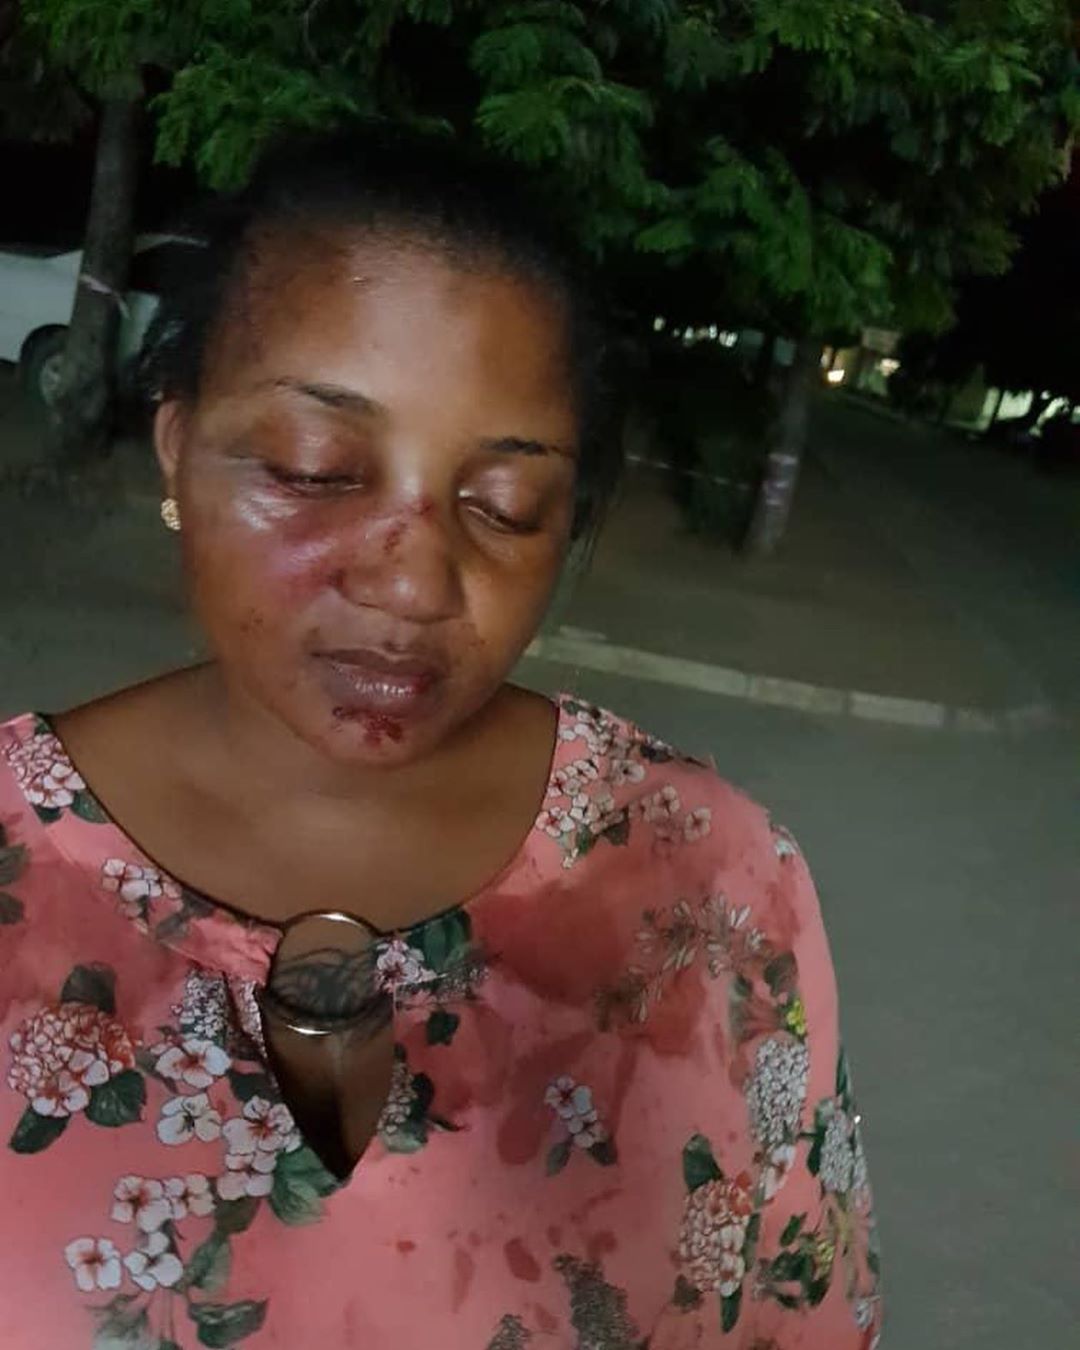 actress-zena-yusuf-with-battered-face